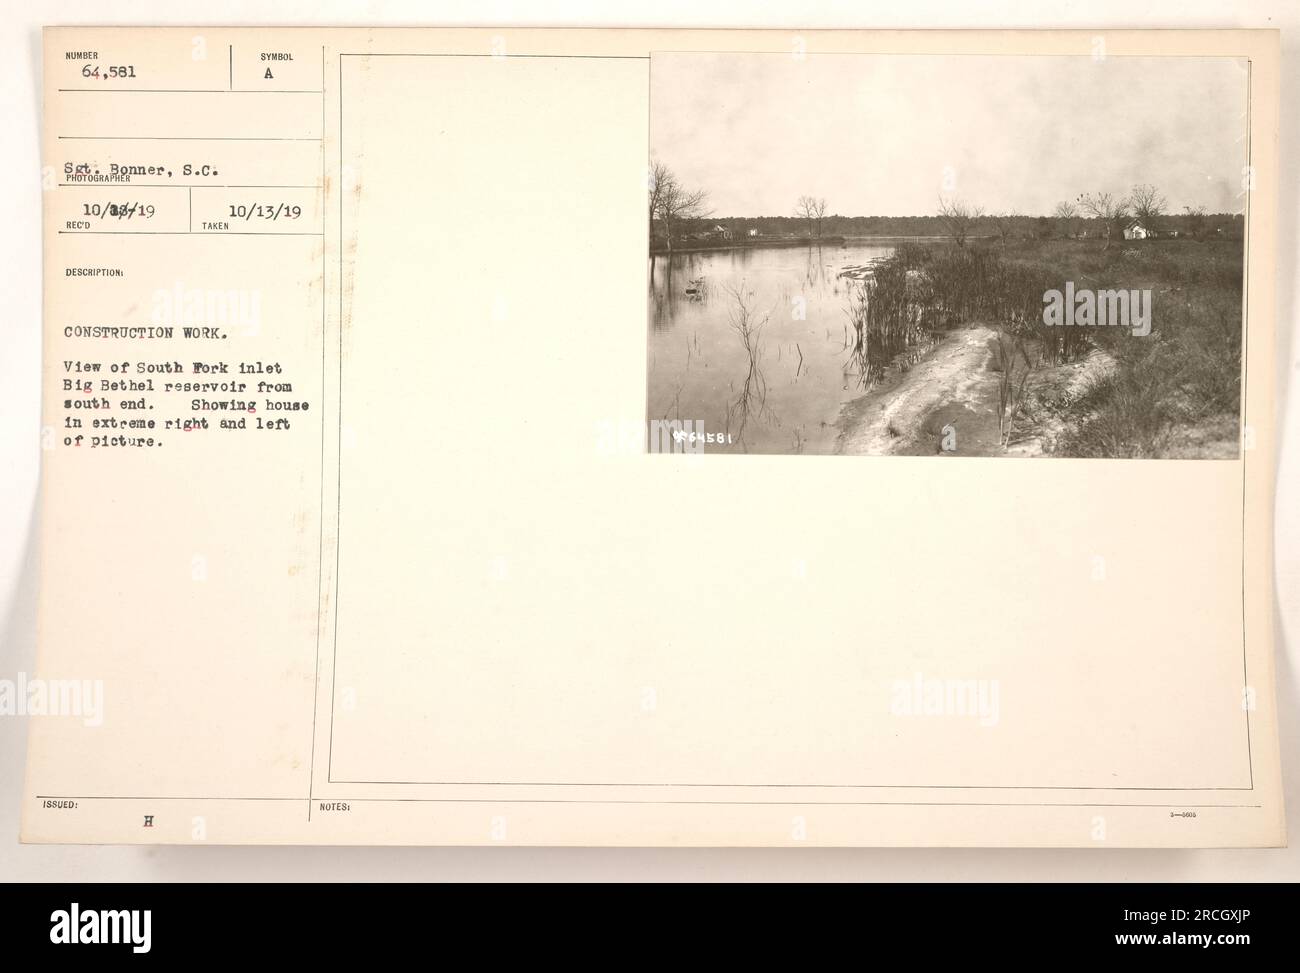 Photograph taken on October 8, 1919, by Sergeant Ronner in South Fork inlet, Big Bethel reservoir. The image depicts construction work with a view of the reservoir from the south end, showcasing houses on the extreme right and left. The photo bears the identification number 965481 and includes an annotation indicating it was taken as part of reconnaissance on October 13, 1919. Stock Photo